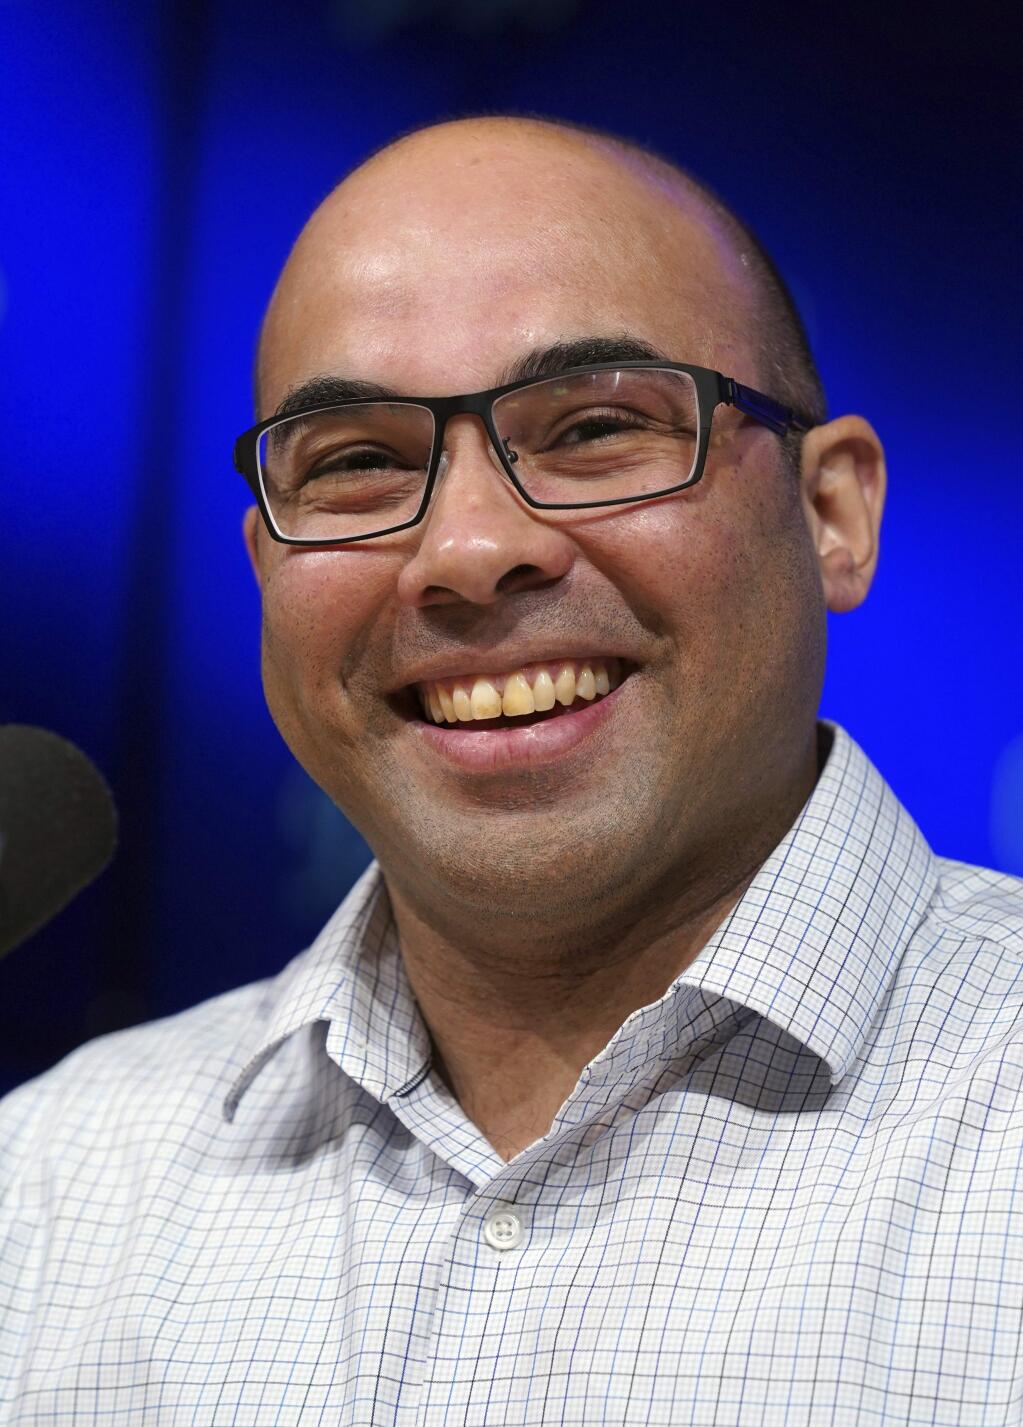 Los Angeles Dodger general manager Farhan Zaidi talks talks about the baseball season and the future of the team and players during a press conference on Thursday, Nov. 1, 2018, at Dodger Stadium in Los Angeles. (Scott Varley/The Orange County Register via AP)